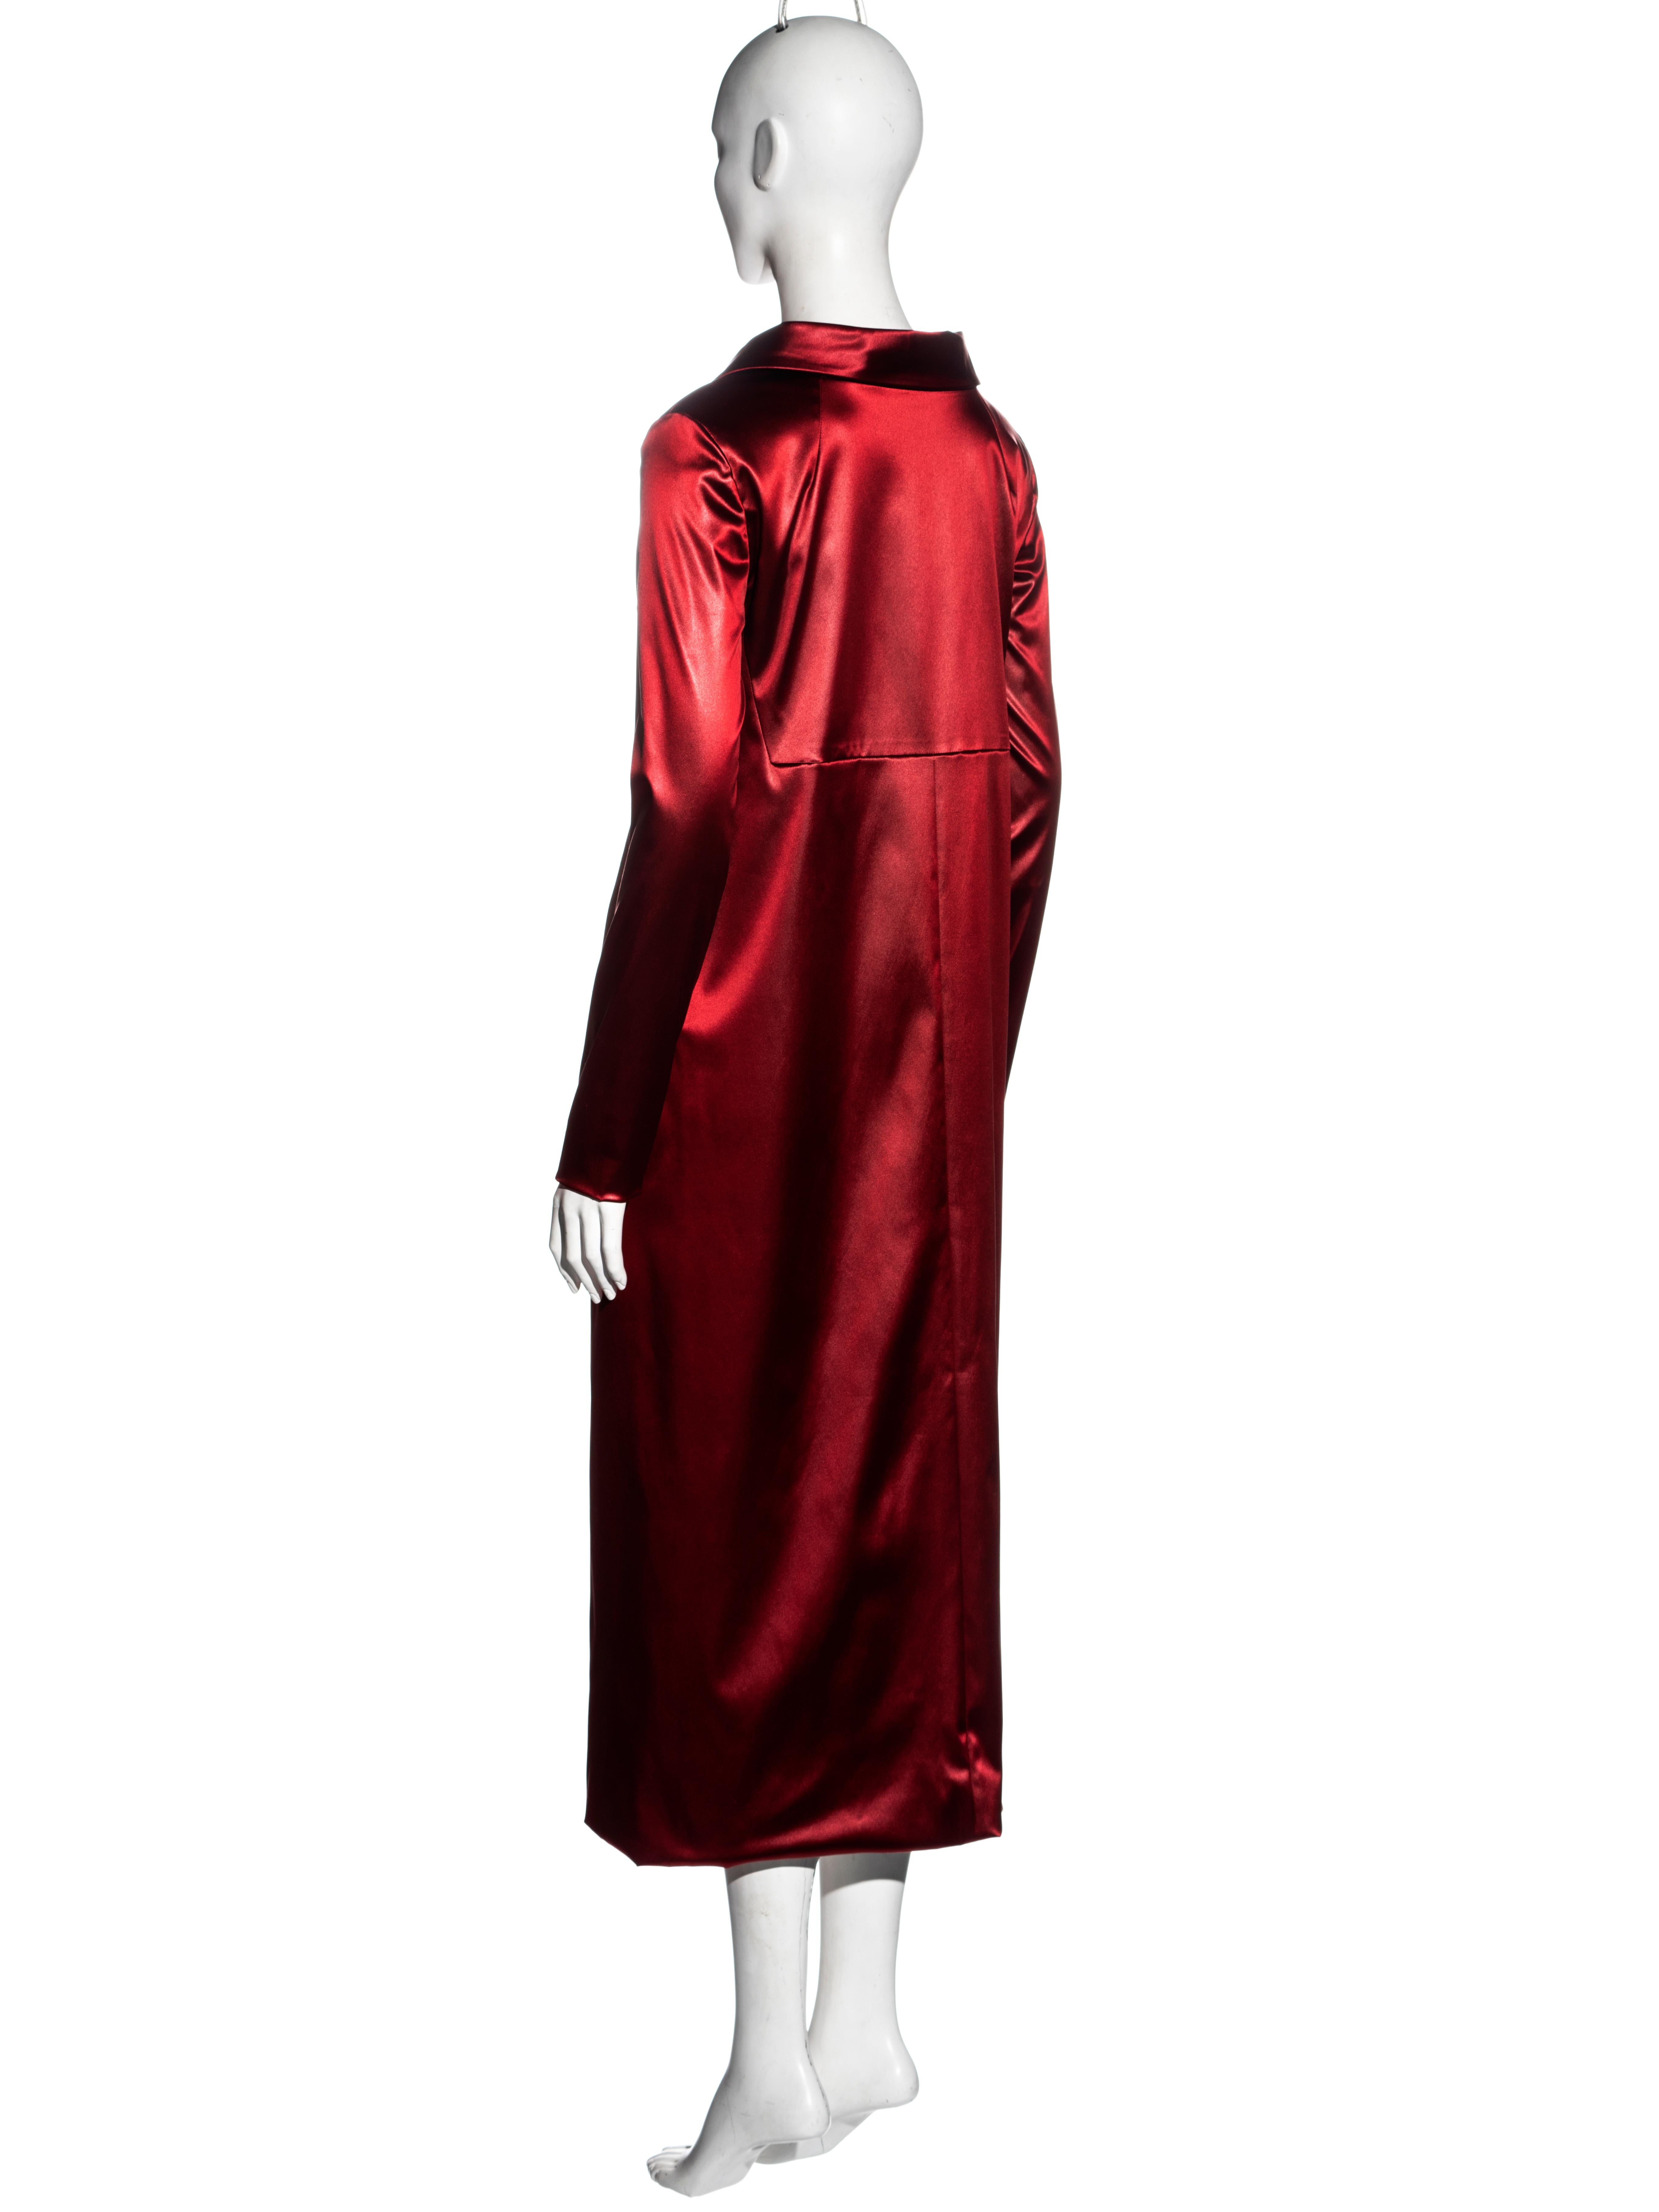 Dolce & Gabbana red stretch-satin coat and skirt set, ss 1999 For Sale 1